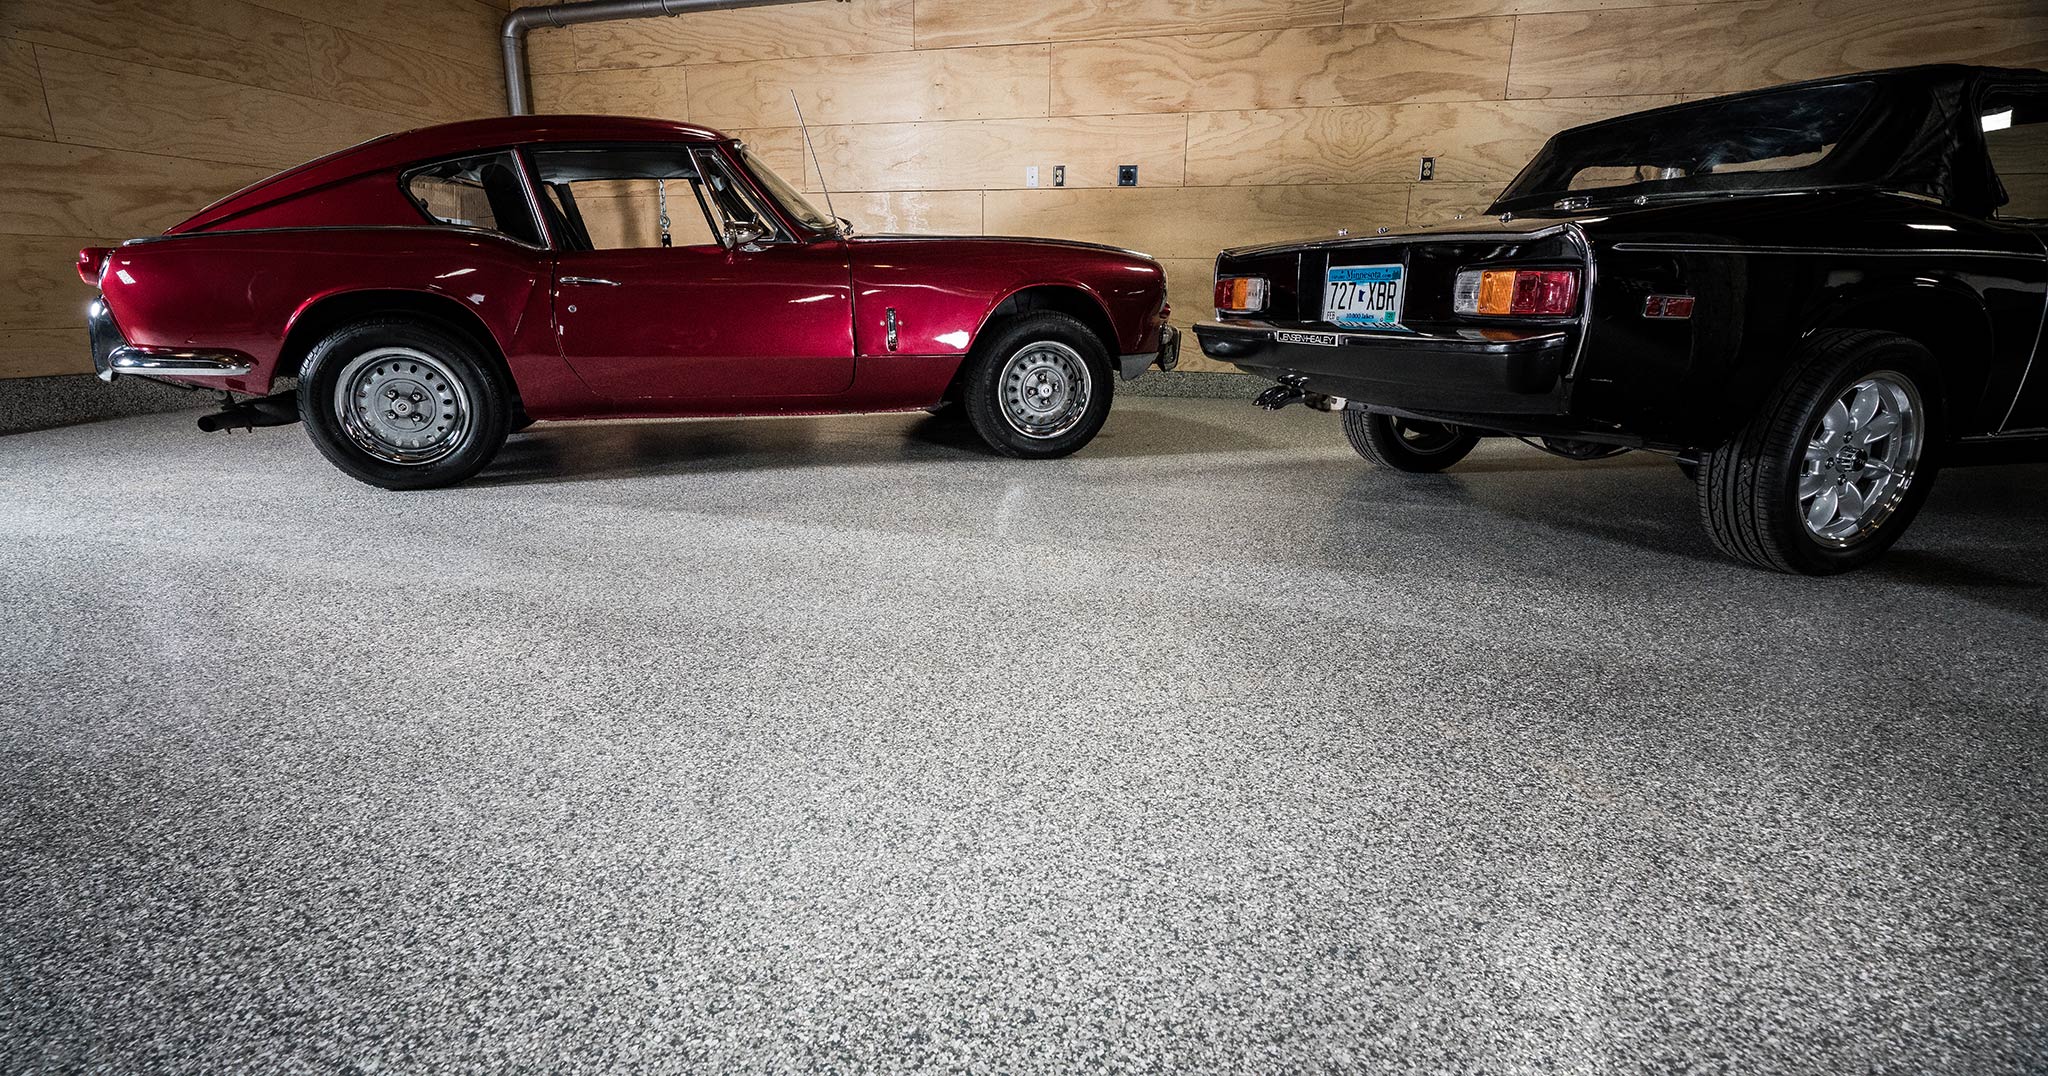 Red sports car parked in a garage with epoxy chip floor coating and non slip surface Endura Vinyl Chip Flooring using Epoxy Polyaspartic Resins | Duraamen Engineered Products Inc